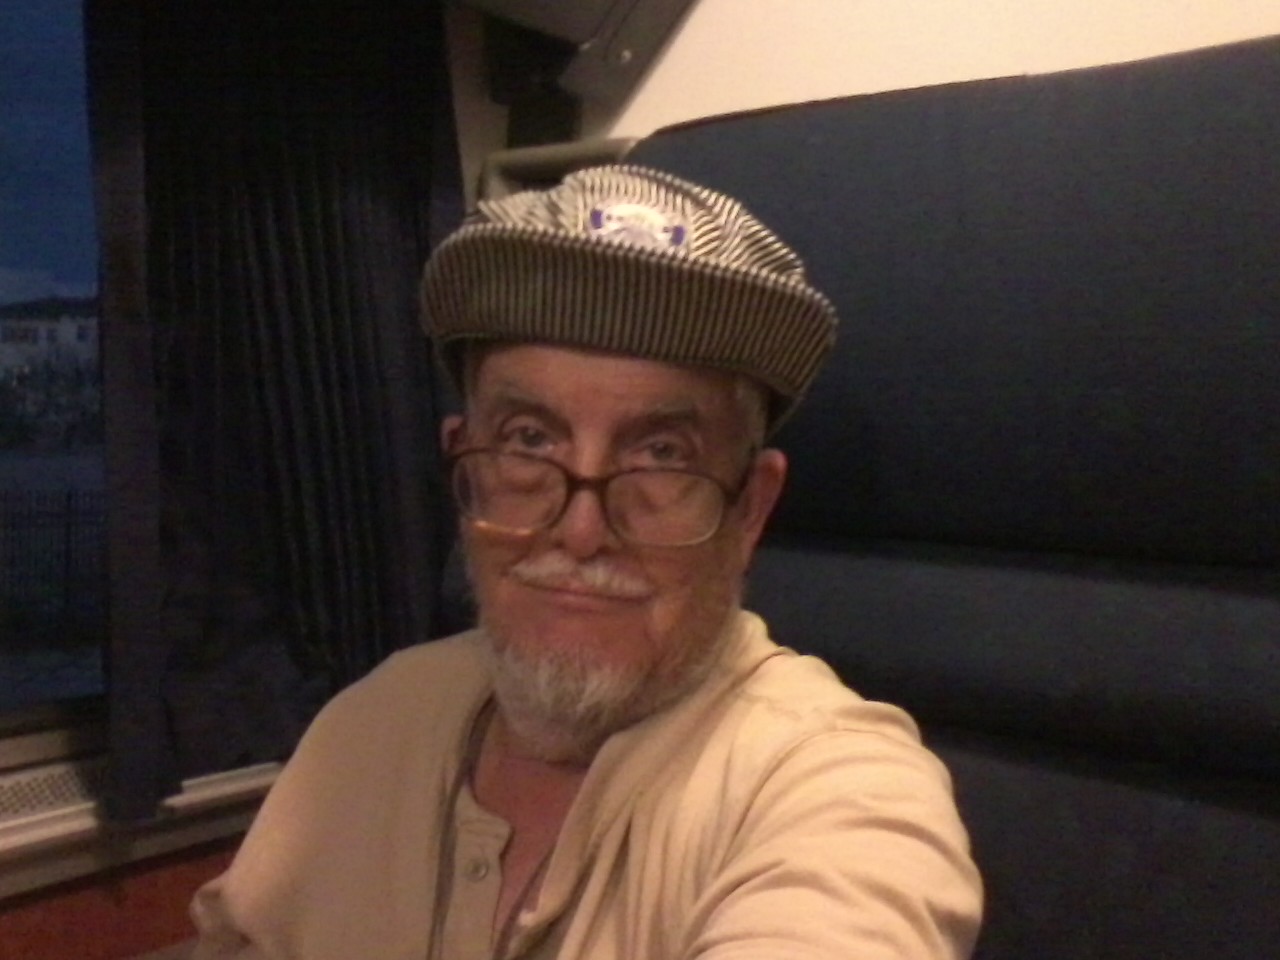 I shoulda been a train driver. In my AMTRAK roomette on way to LA...